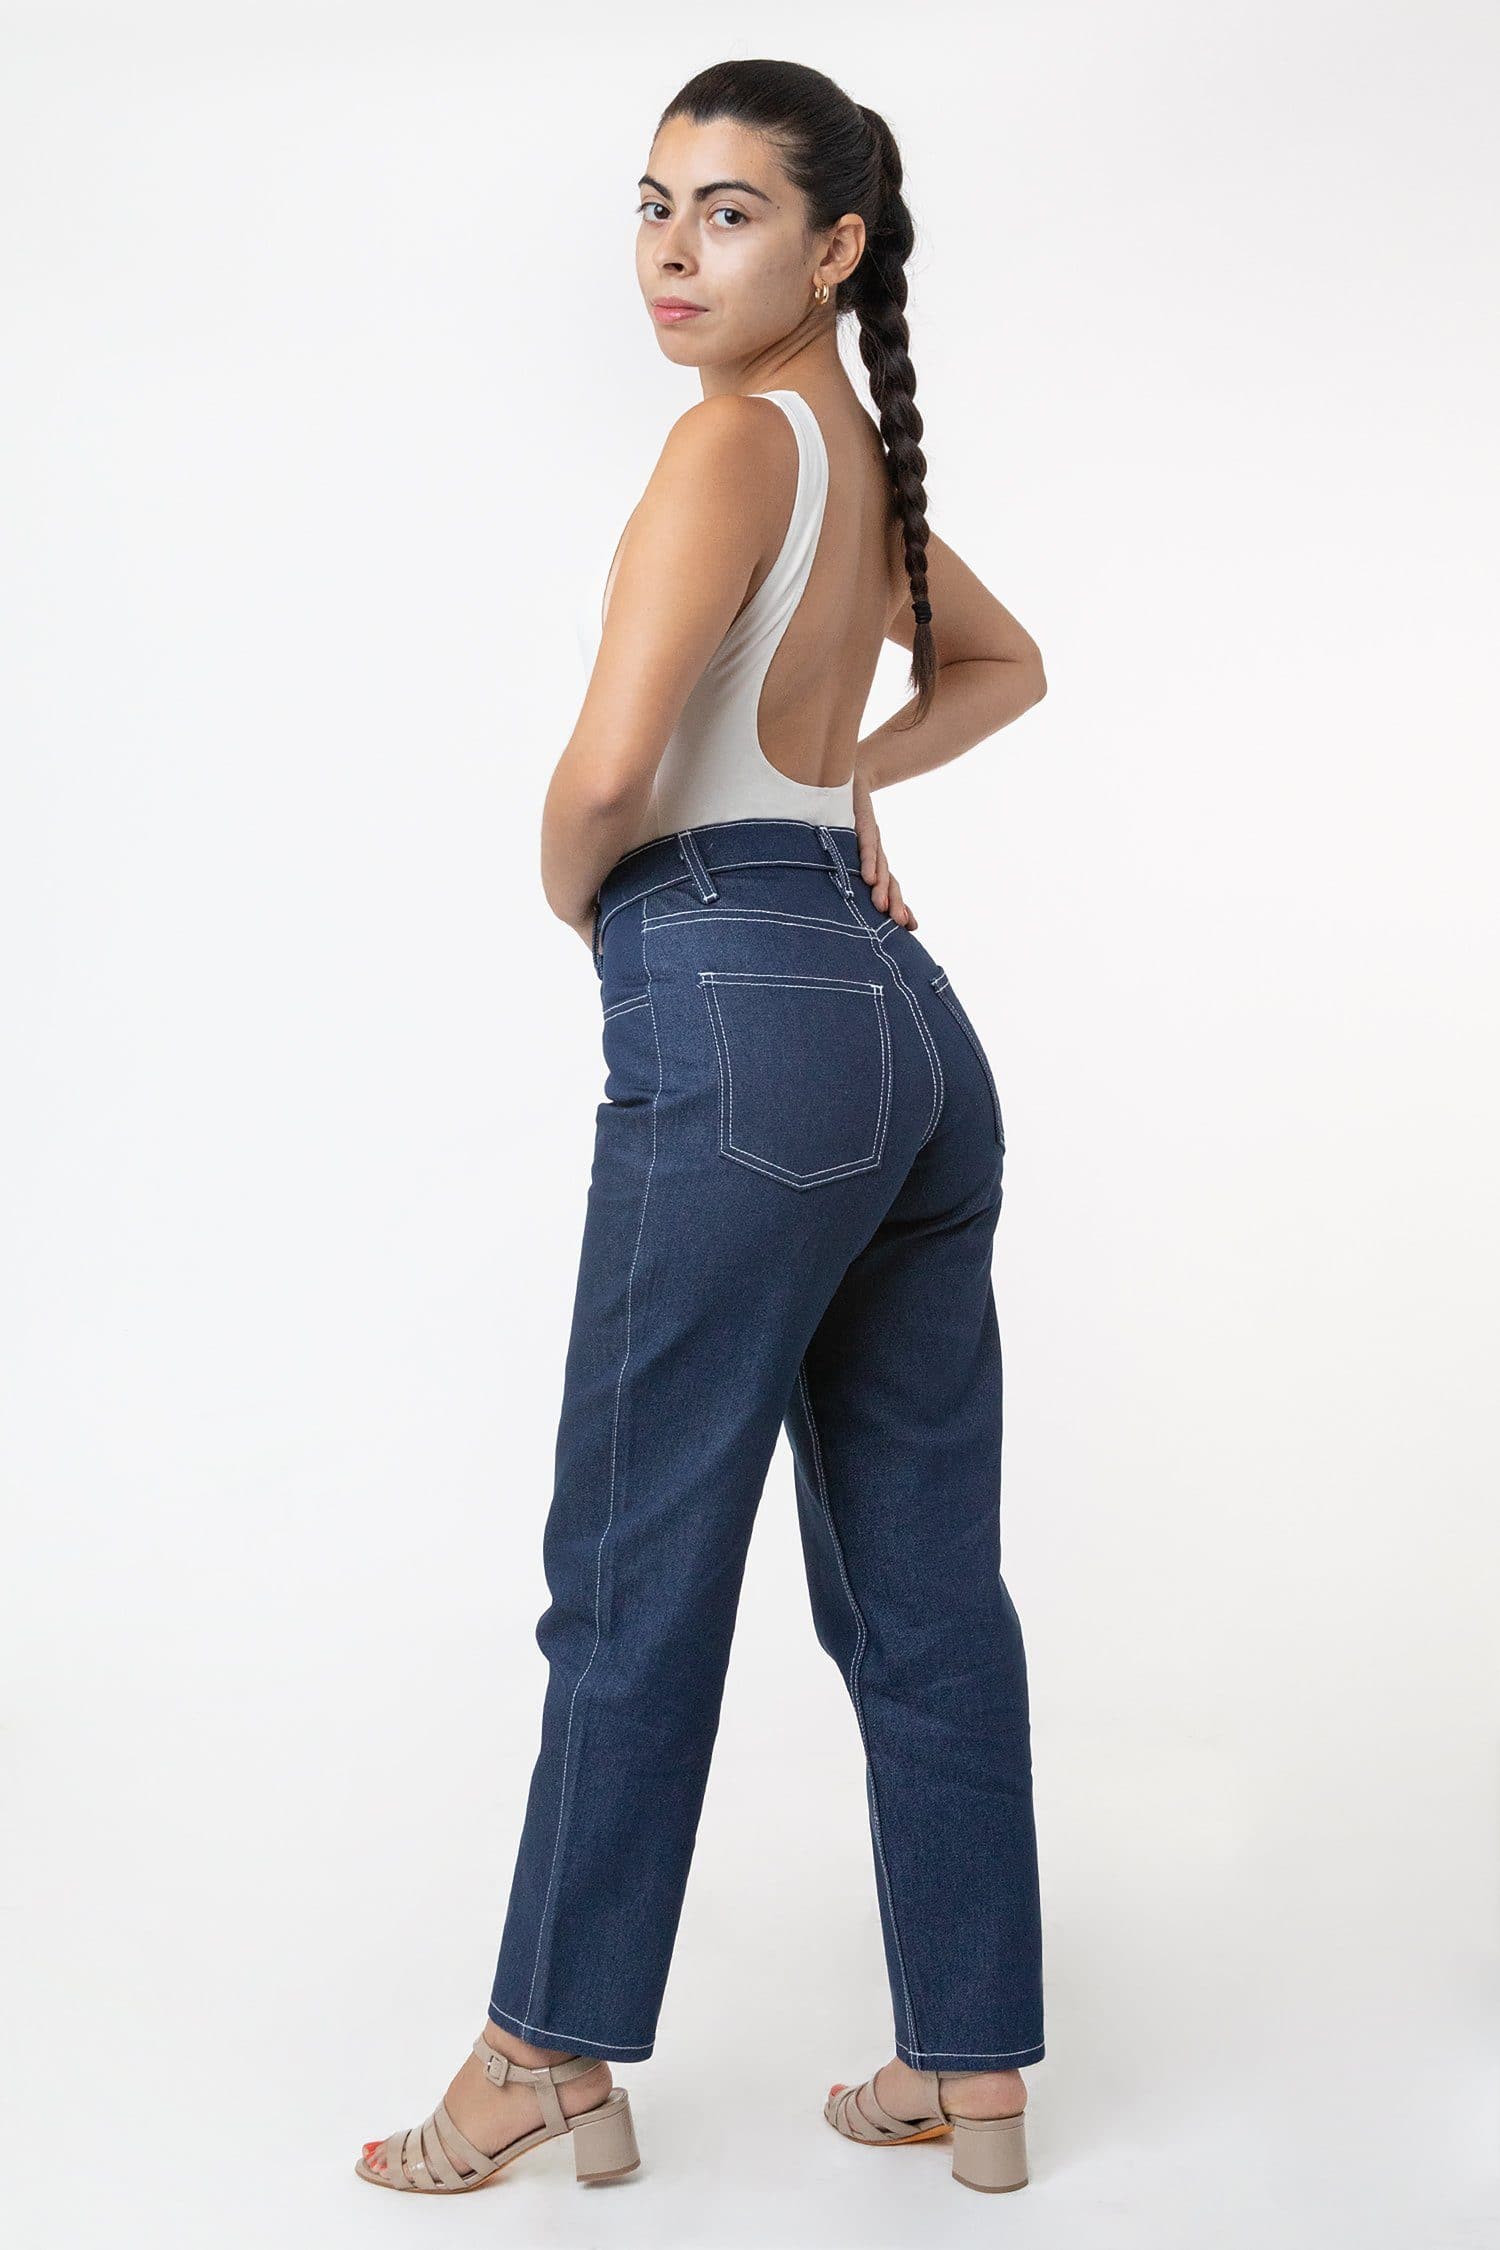 RDNW01 - Raw Indigo Women's Relaxed Fit Jeans – Los Angeles Apparel